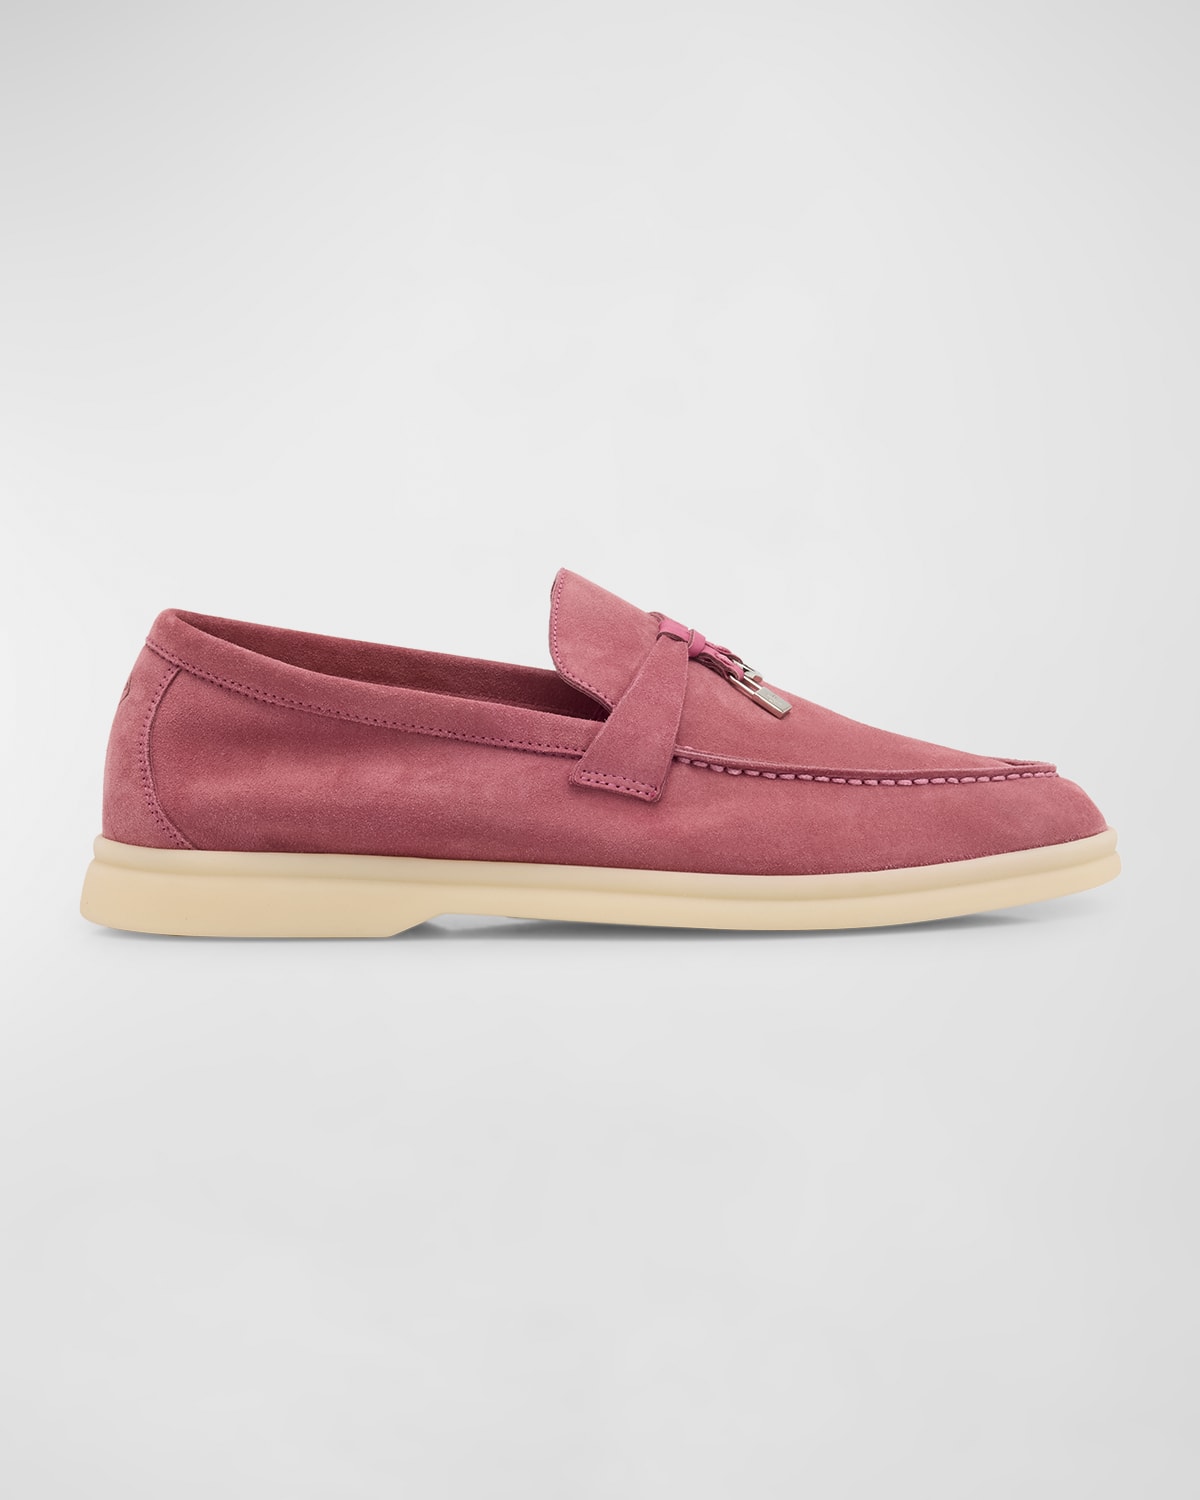 Loro Piana Summer Charms Walk Suede Loafers In Pink